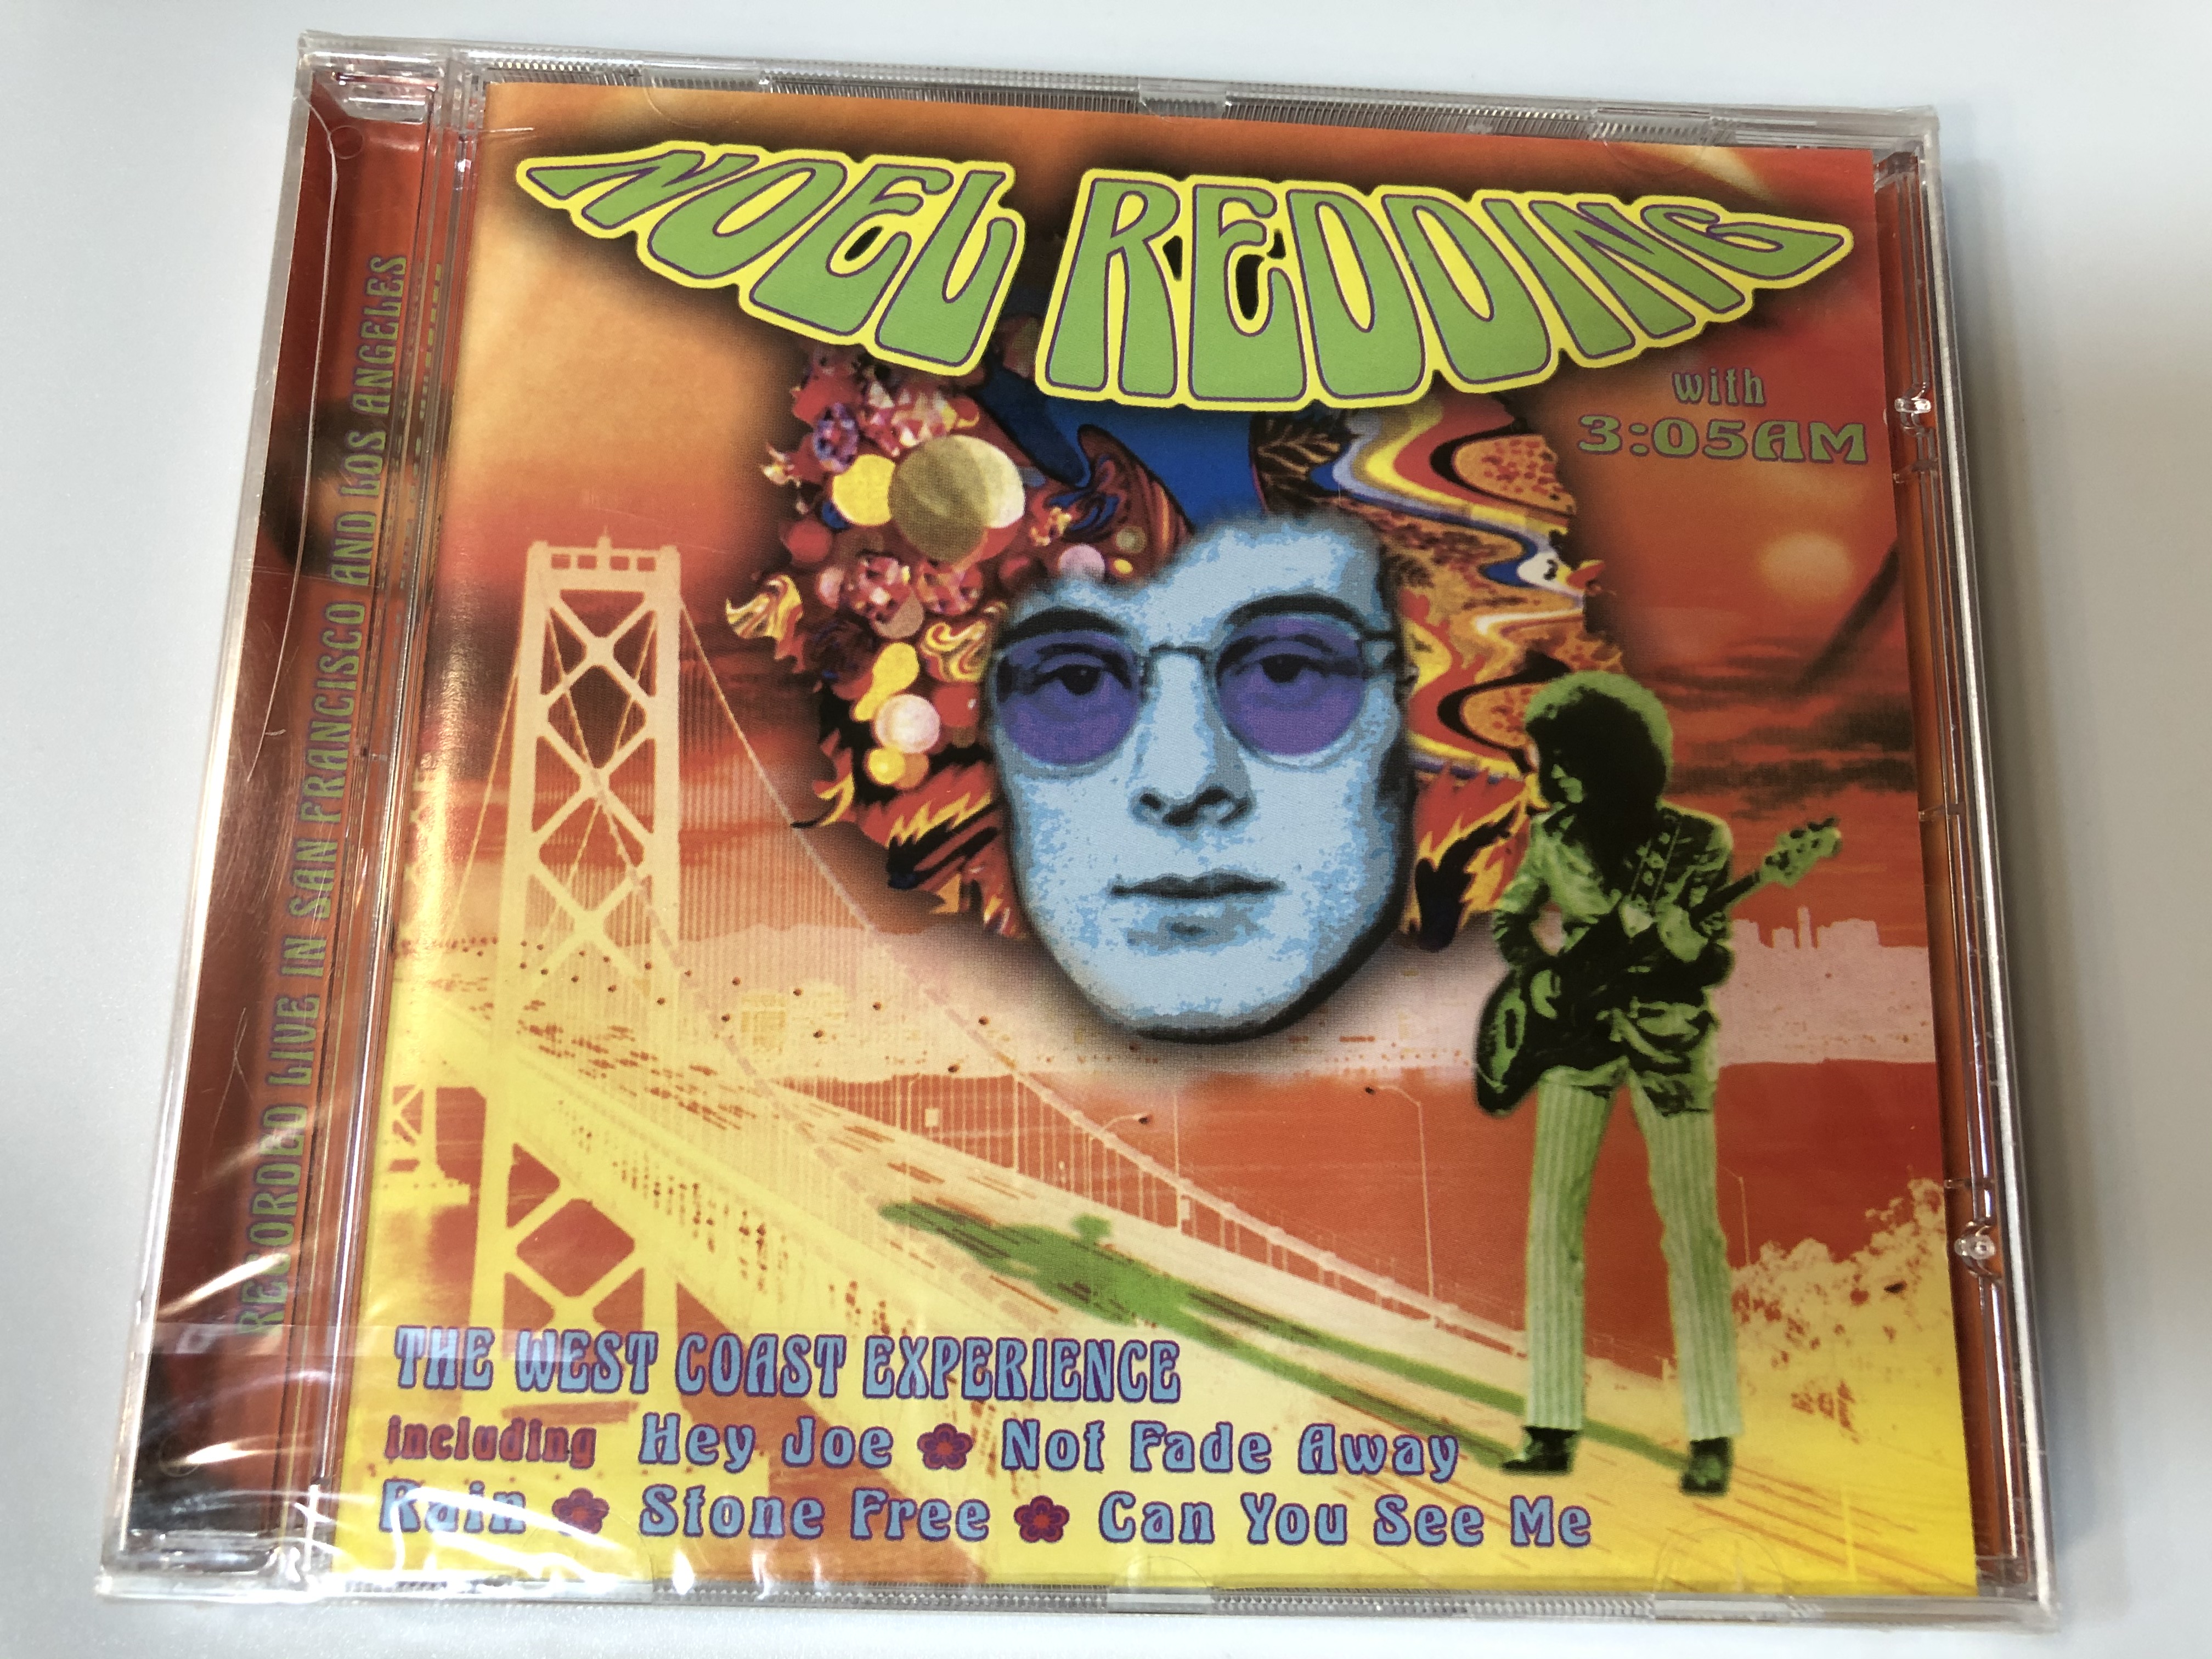 noel-redding-with-305-am-the-west-coast-experience-including-hey-joe-not-pade-away-rain-stone-free-can-you-see-me-prism-leisure-audio-cd-2001-platcd-723-1-.jpg